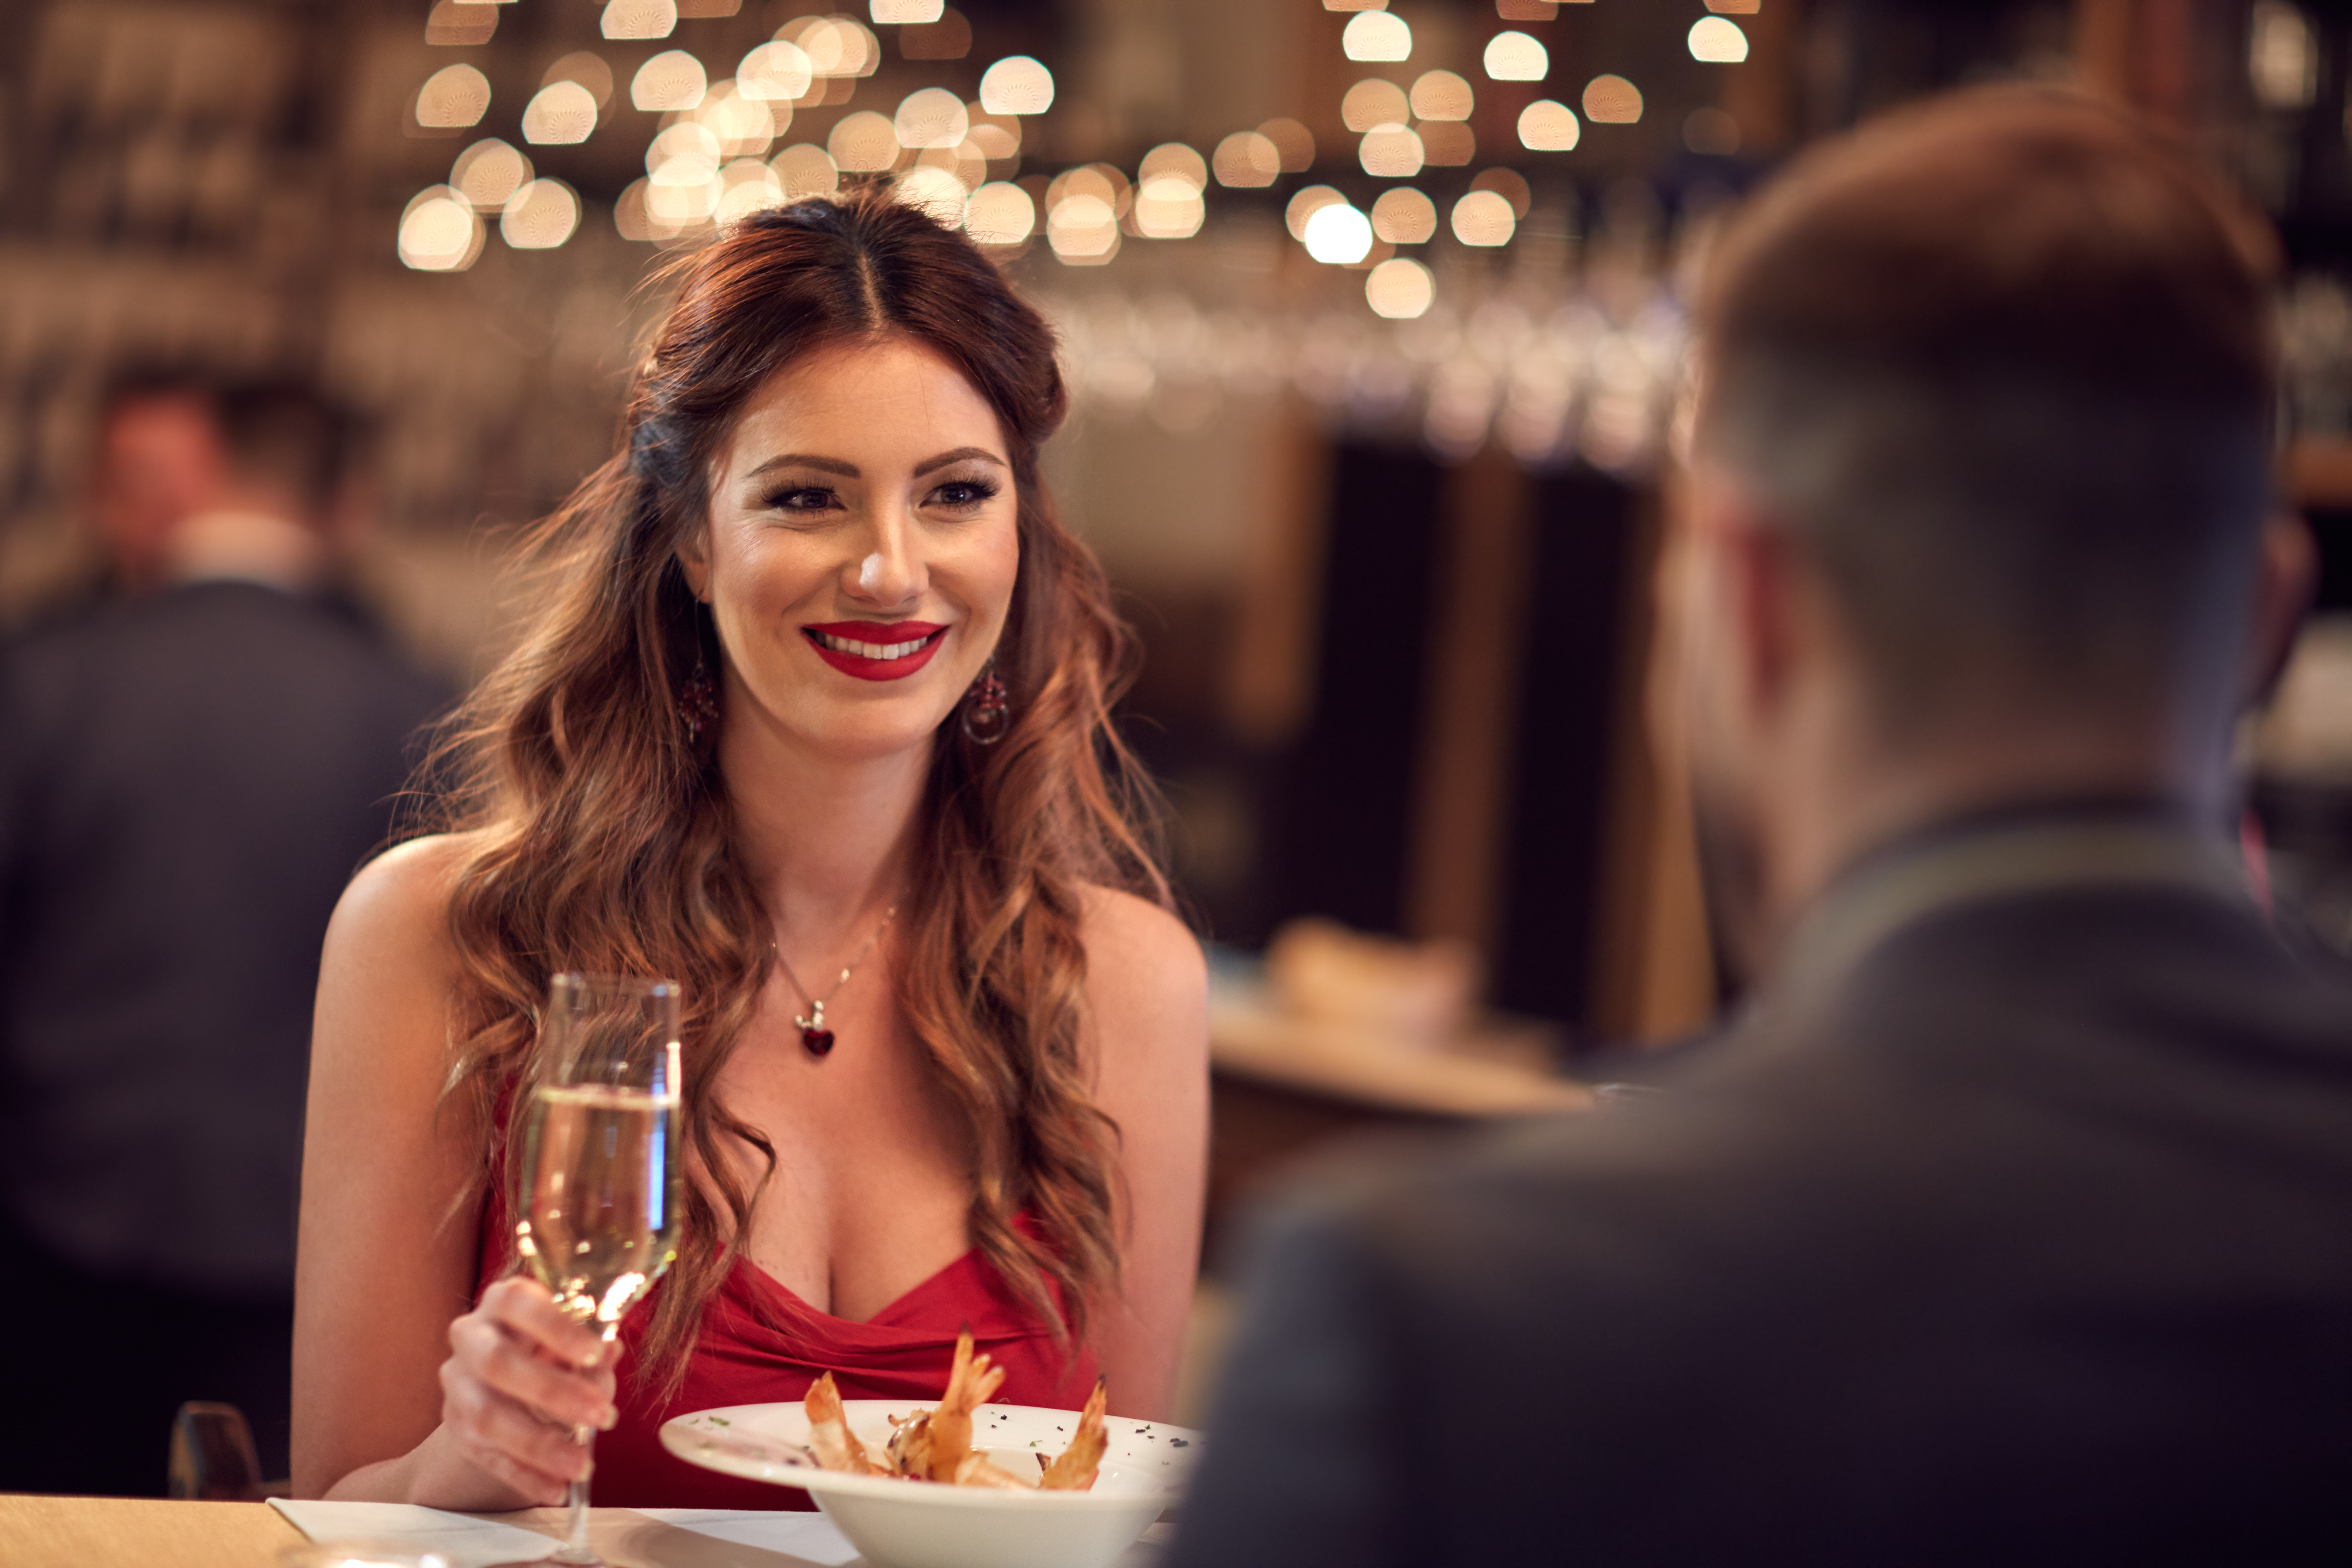 Woman in red dress dining out with her boyfriend | Source: Shutterstock